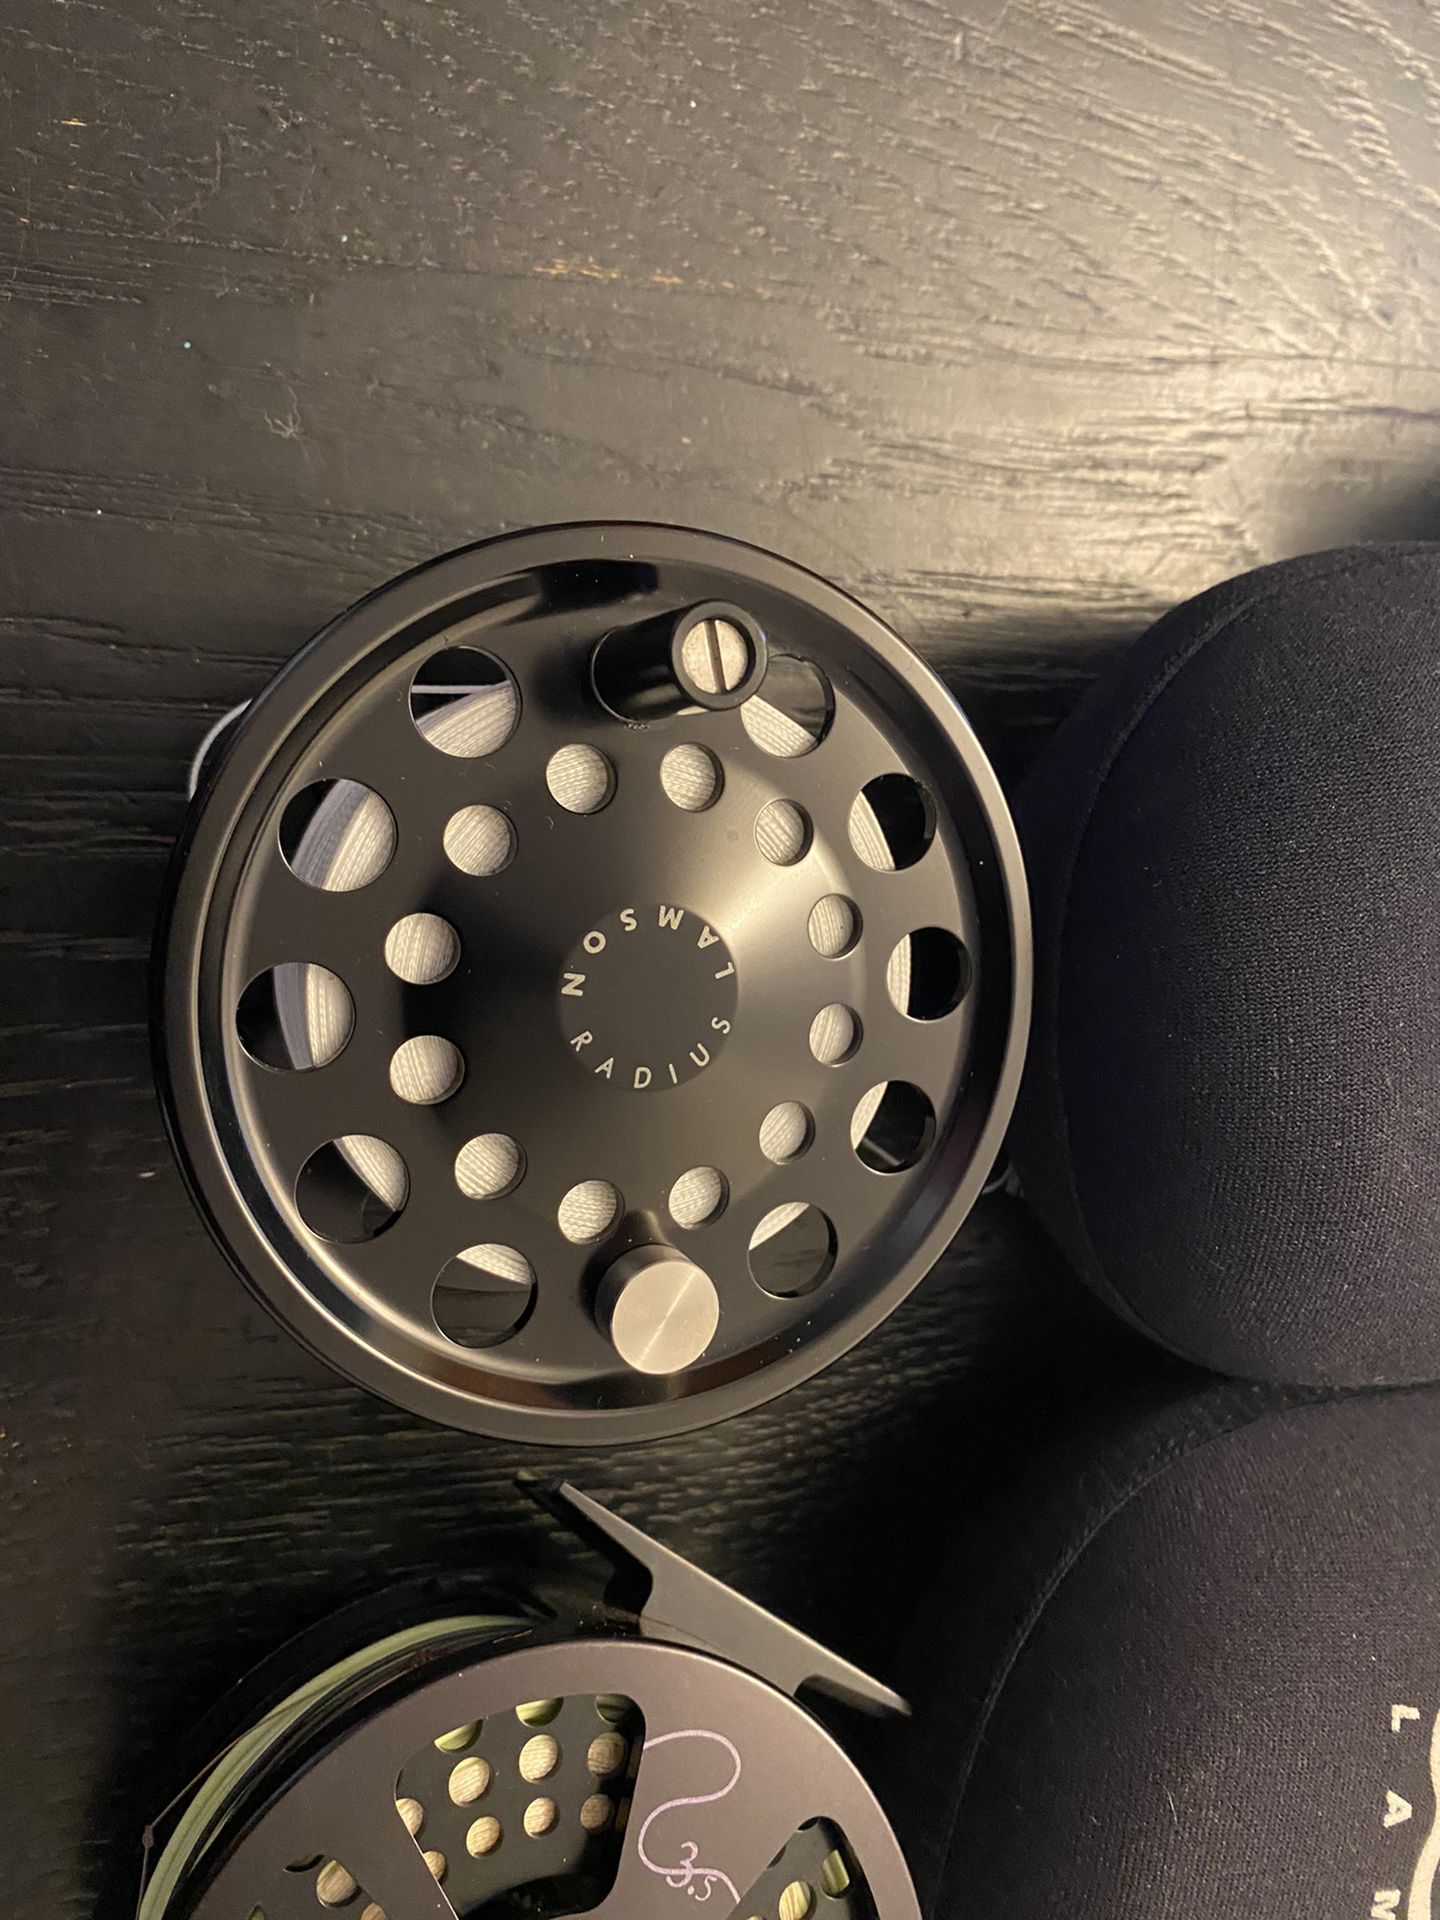 Lamson Radius 3.5 Fly fishing reel with 2 extra spools for Sale in Everett,  WA - OfferUp